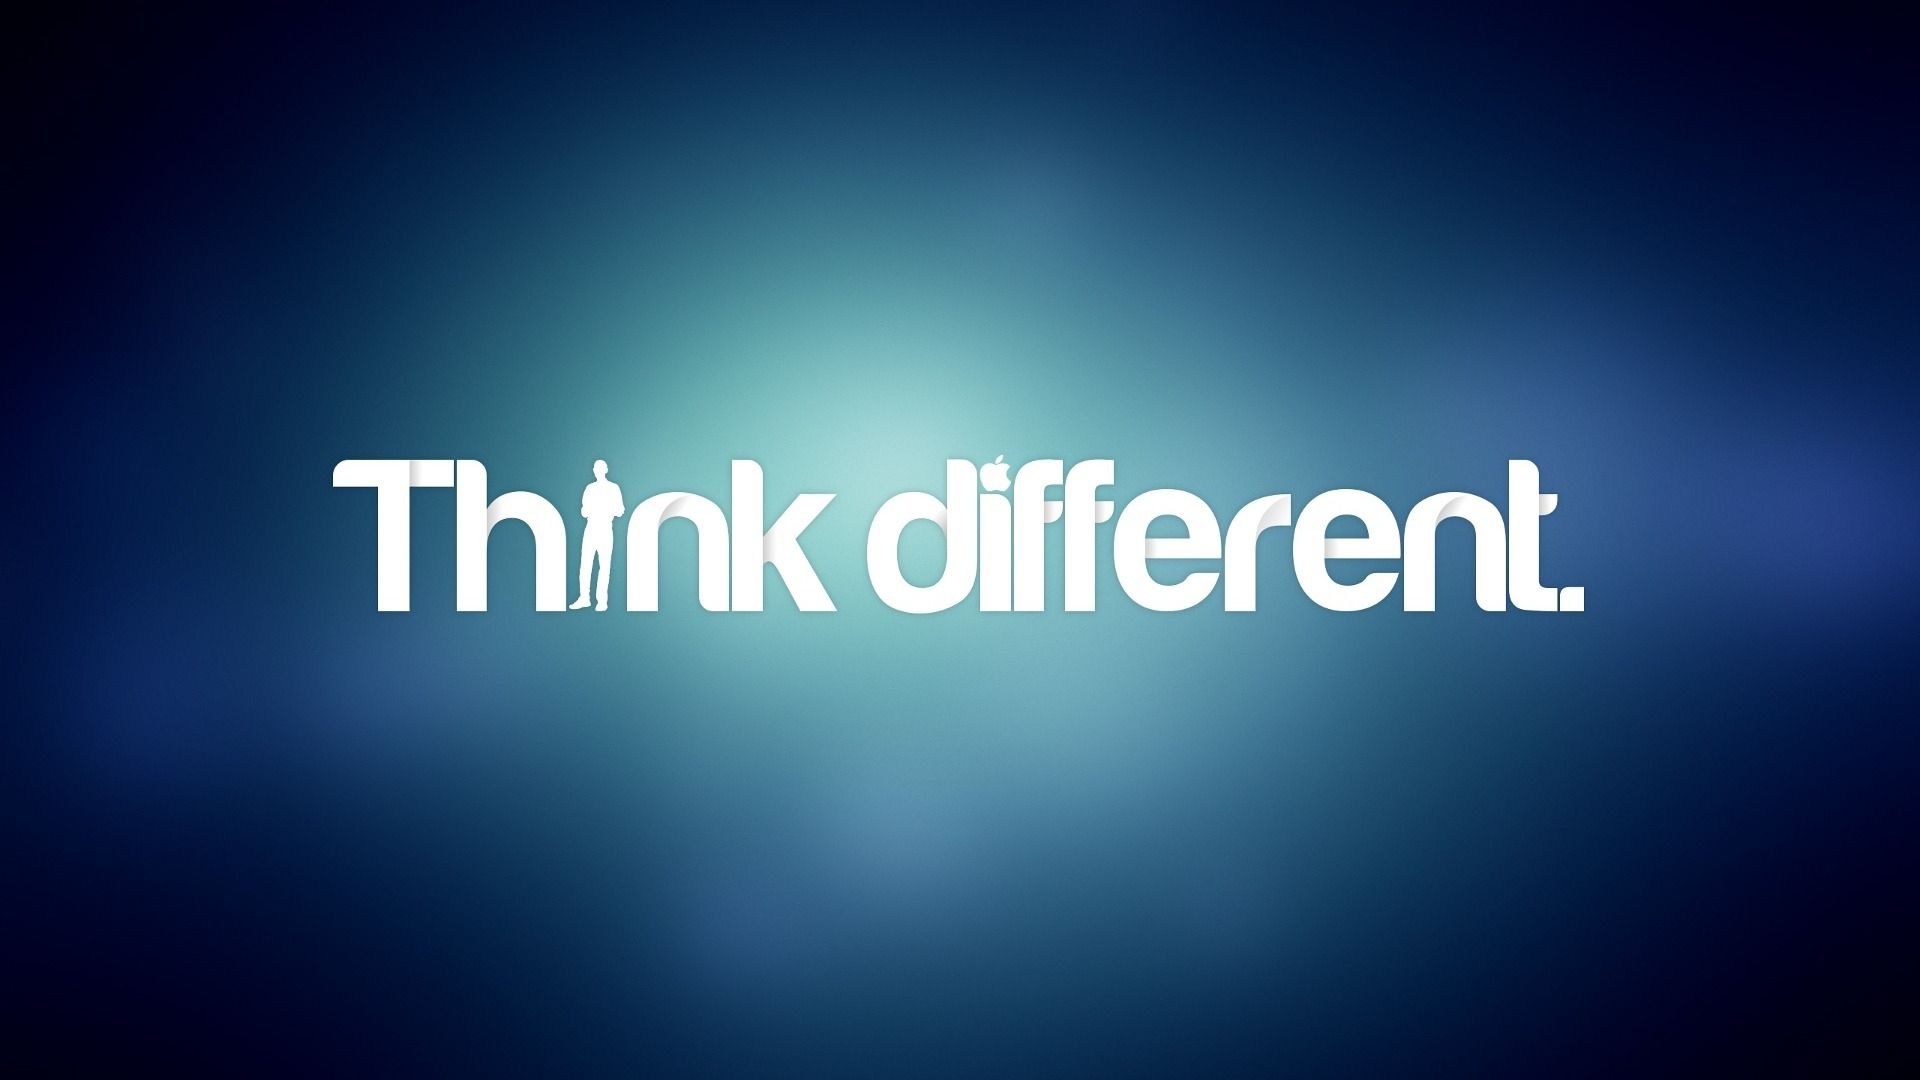 Think different by Apple HD Wallpaper